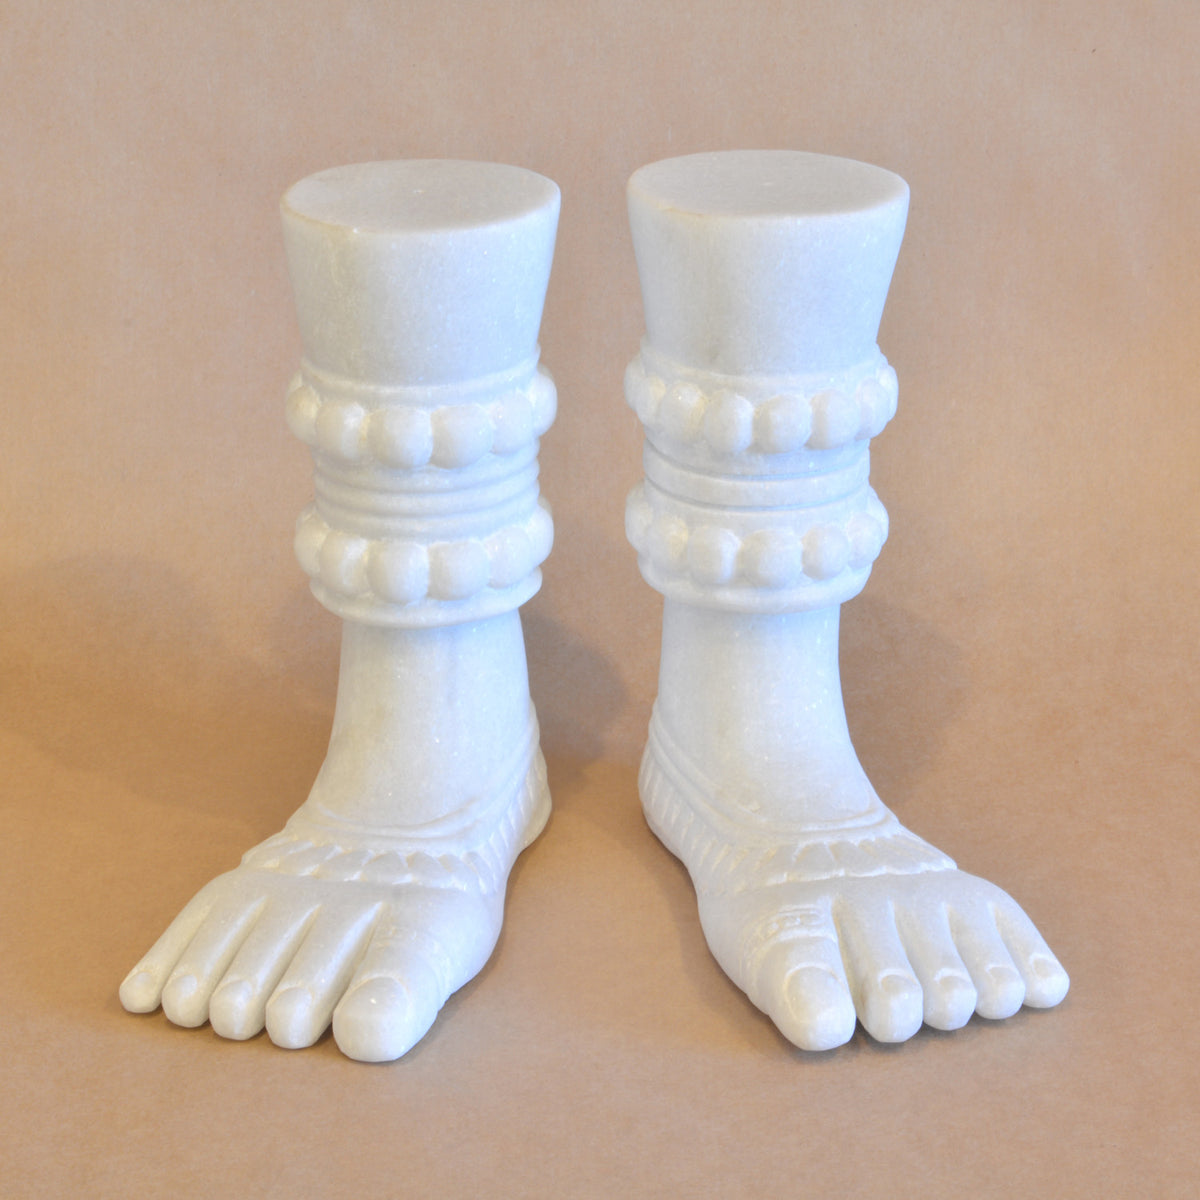 Buddha Feet carved from White Marble image 3 of 7